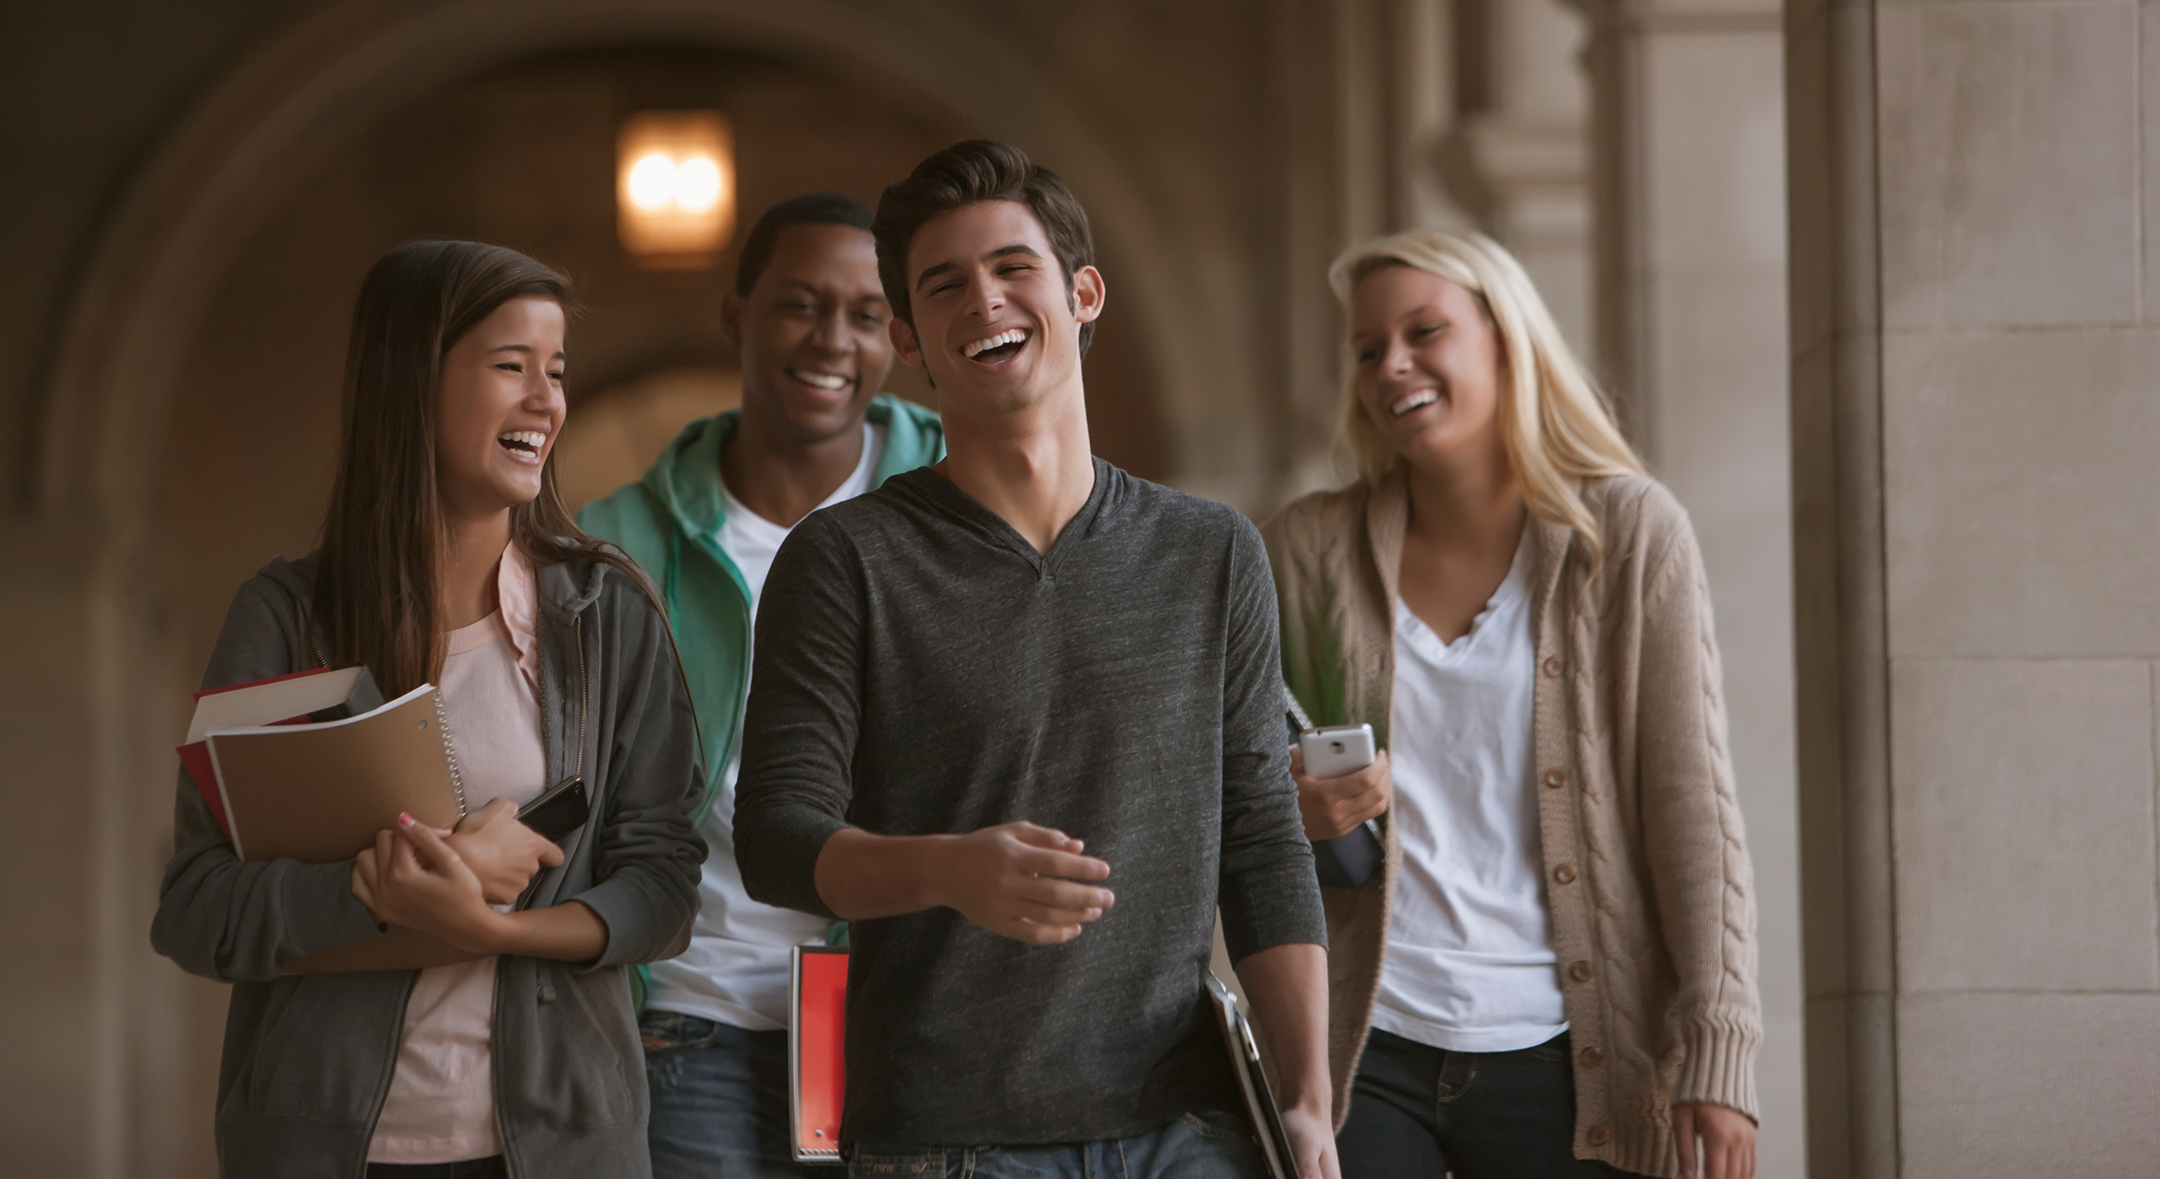 Four college students, 2 male 2 female, smile and laugh as they walk along campus